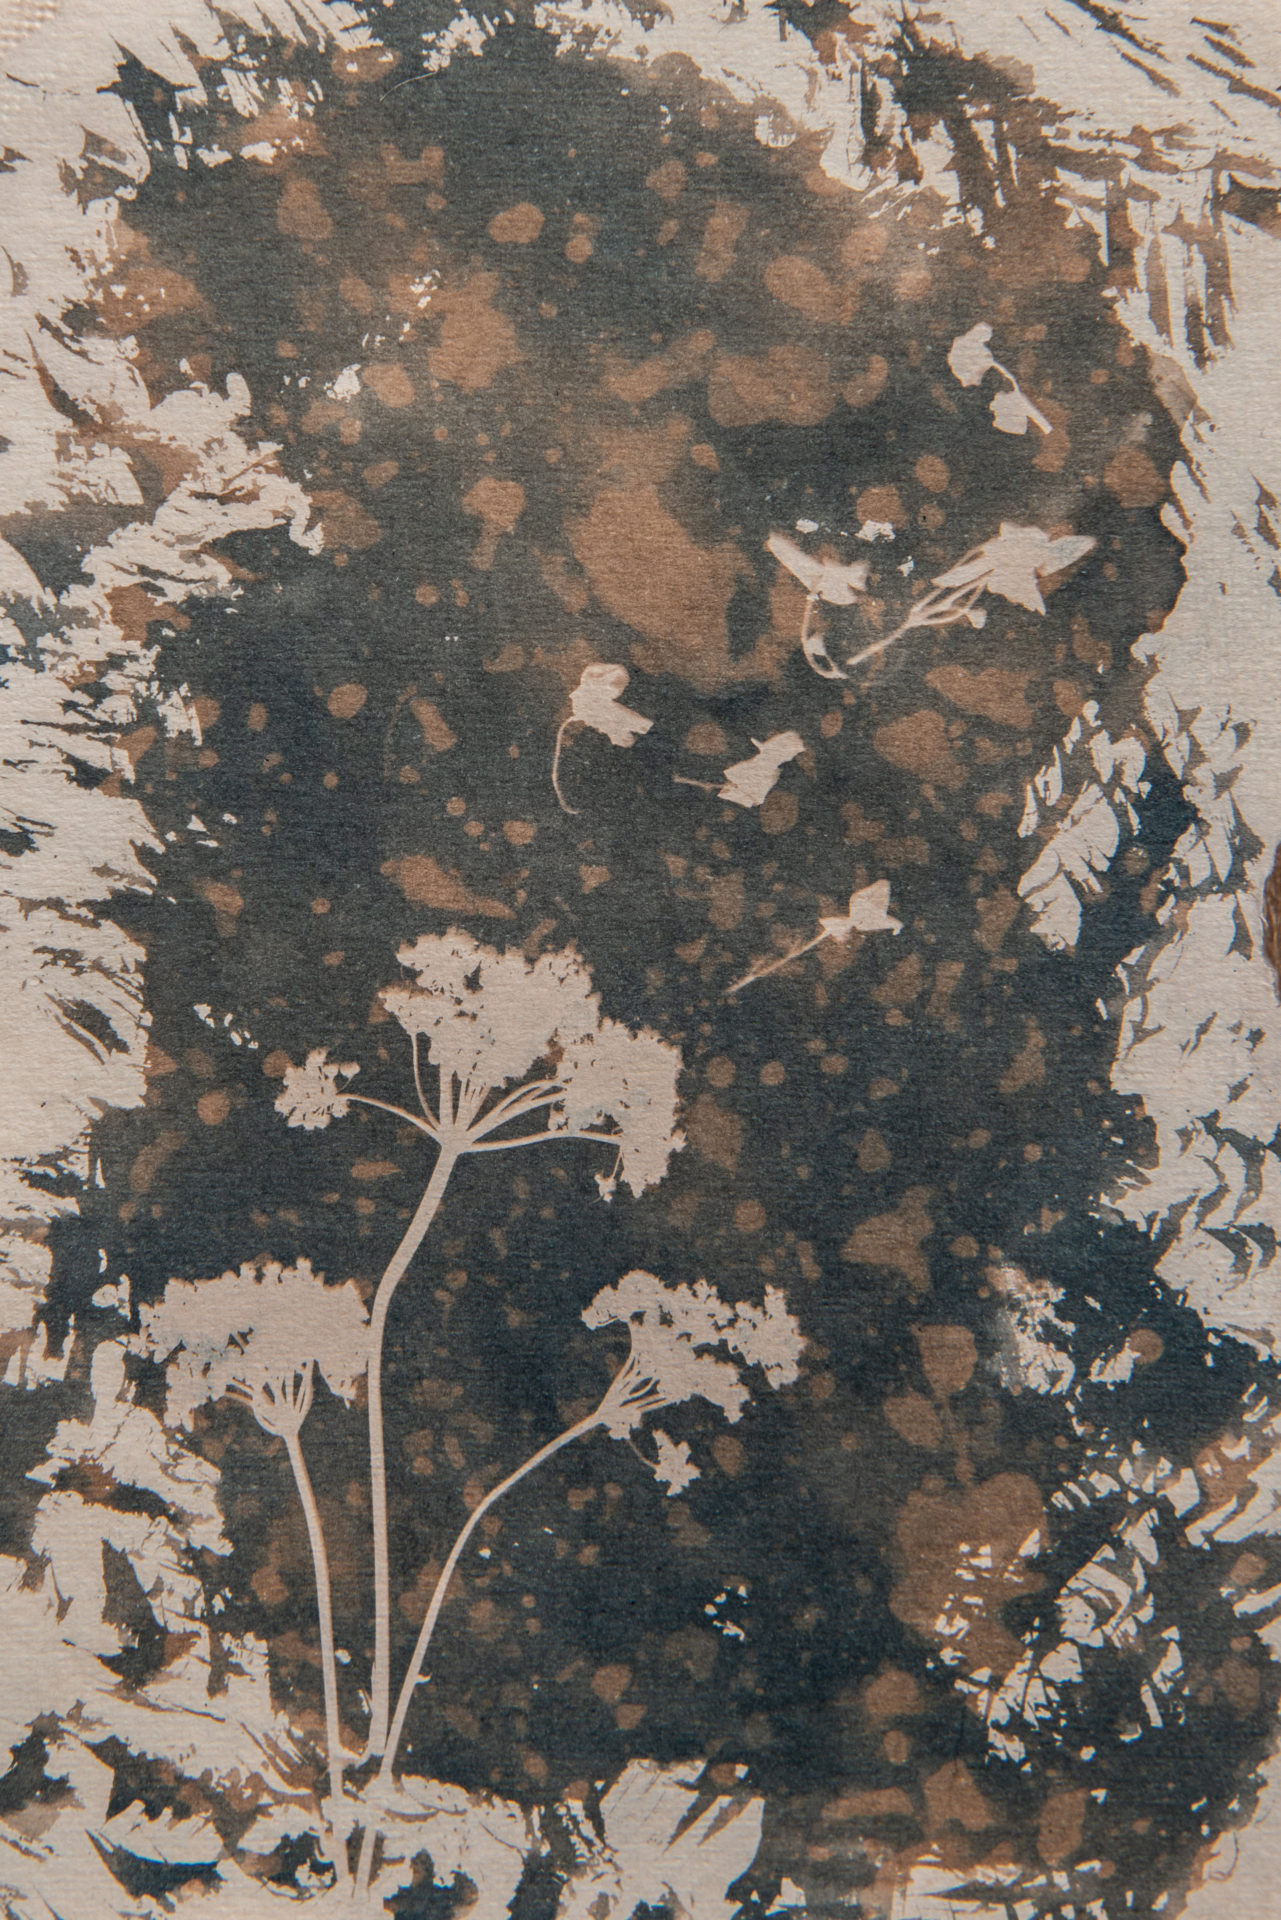 cyanotype contemporary art grey brown vintage aged botanical art for sale Oxford